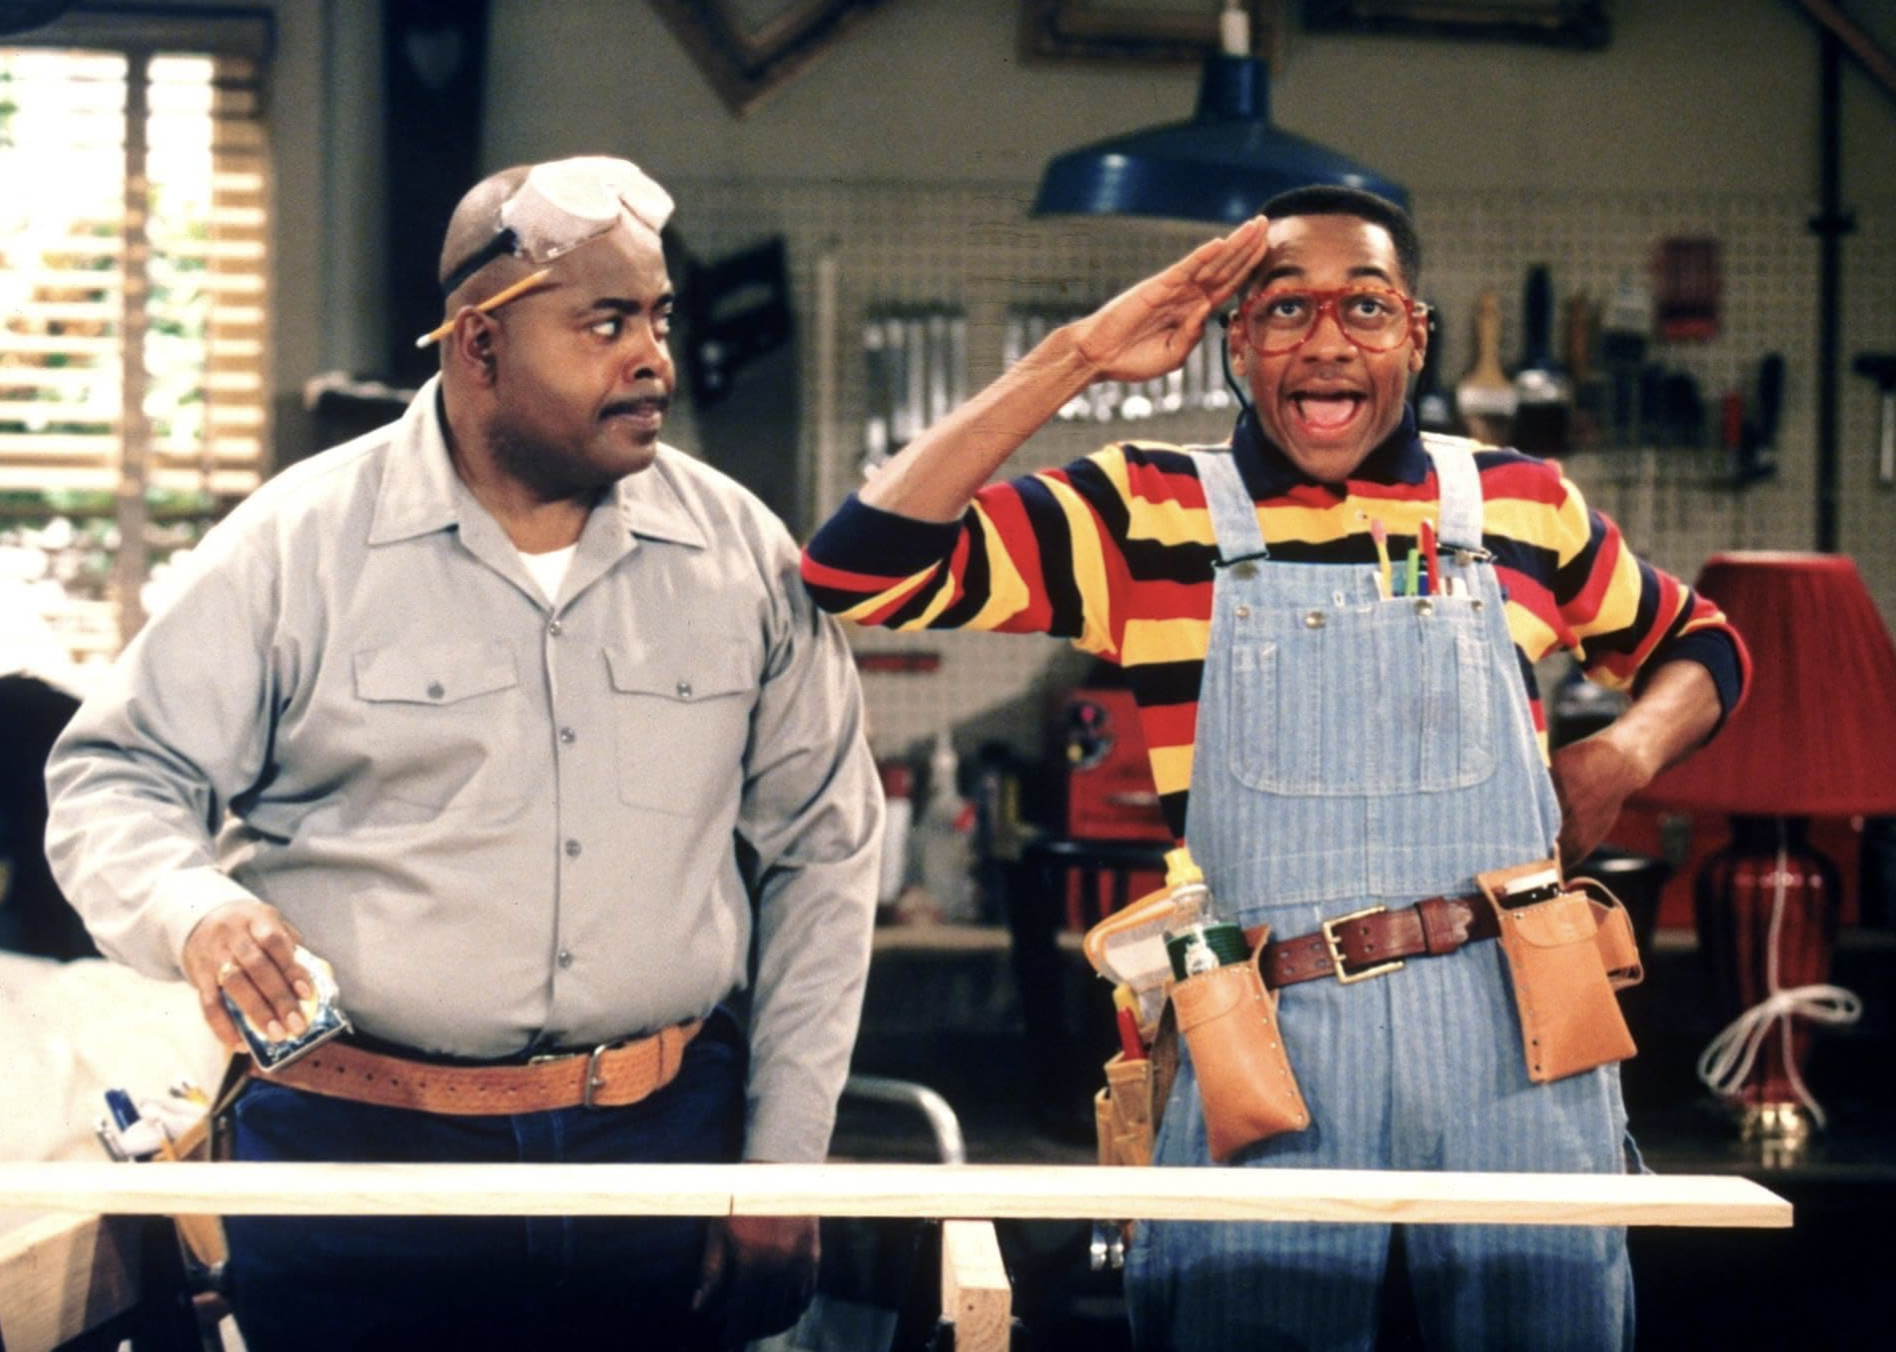 Reginald VelJohnson and Jaleel White in a scene from "Family Matters".